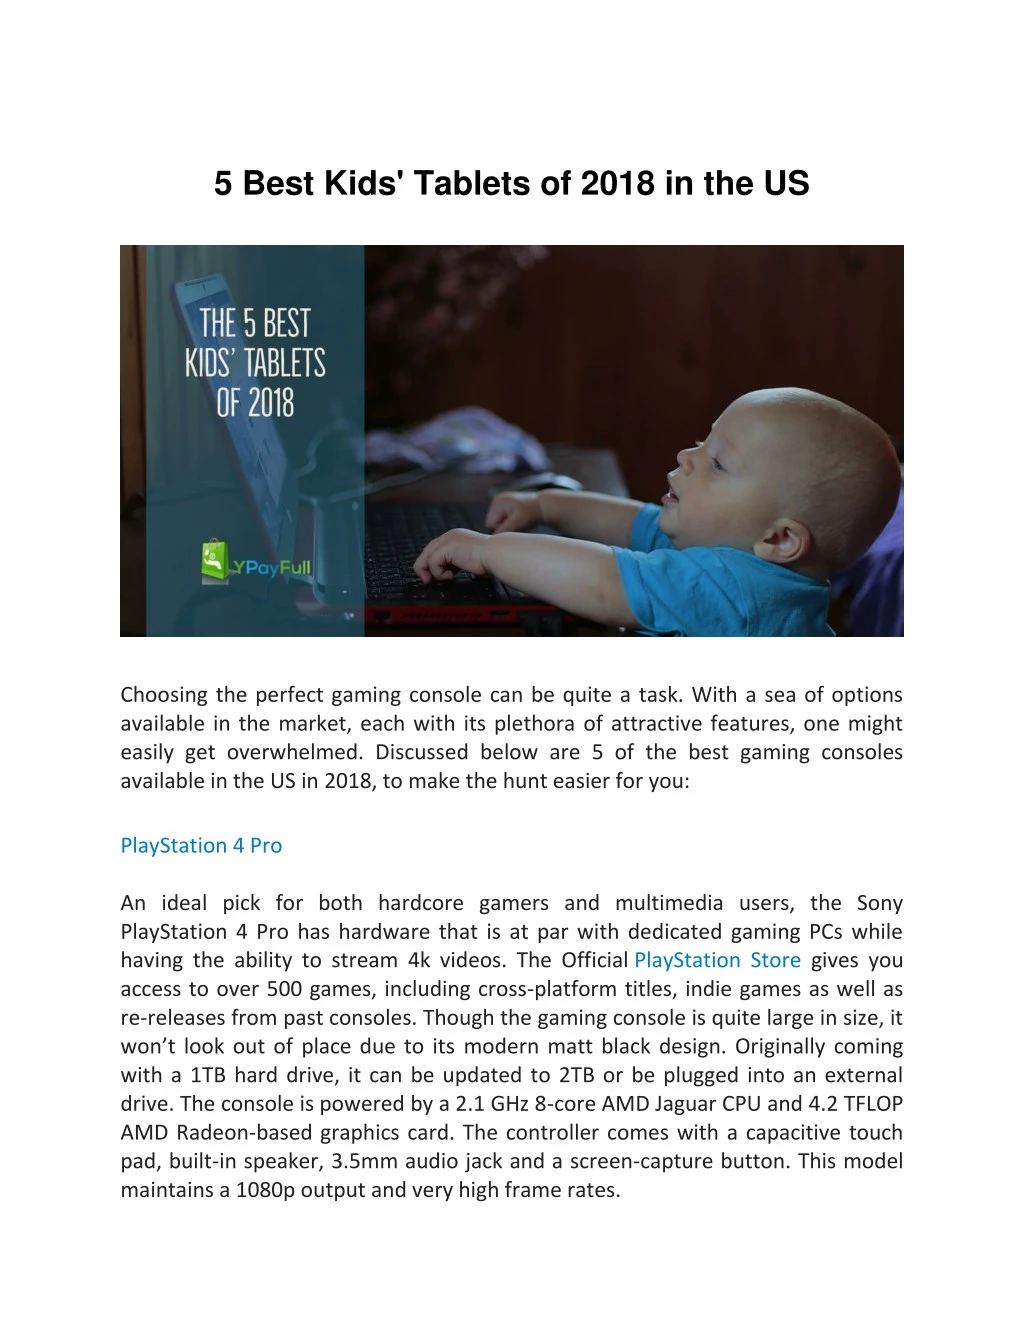 5 best kids tablets of 2018 in the us